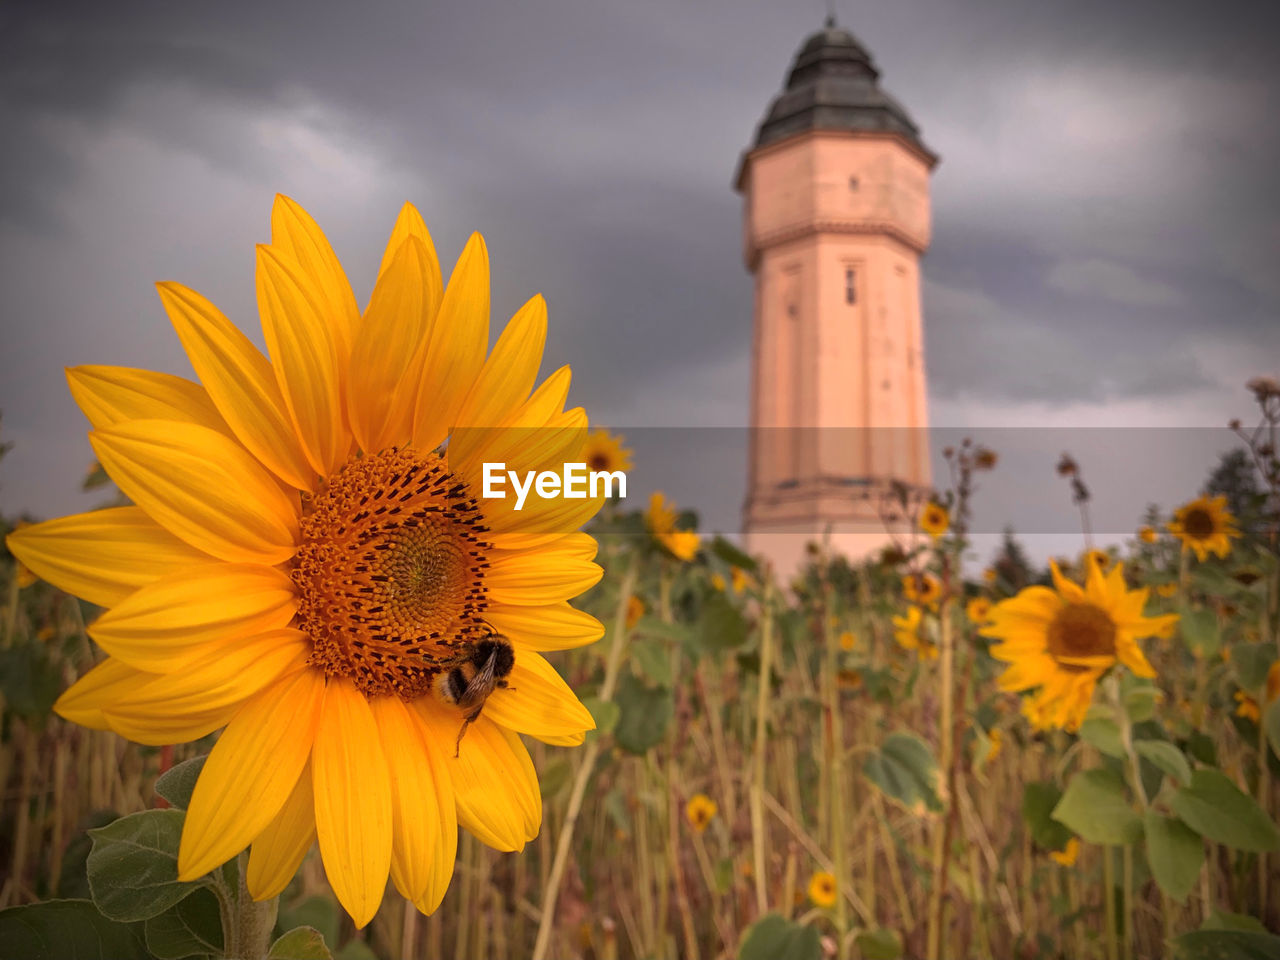 The water tower and the sunflower 